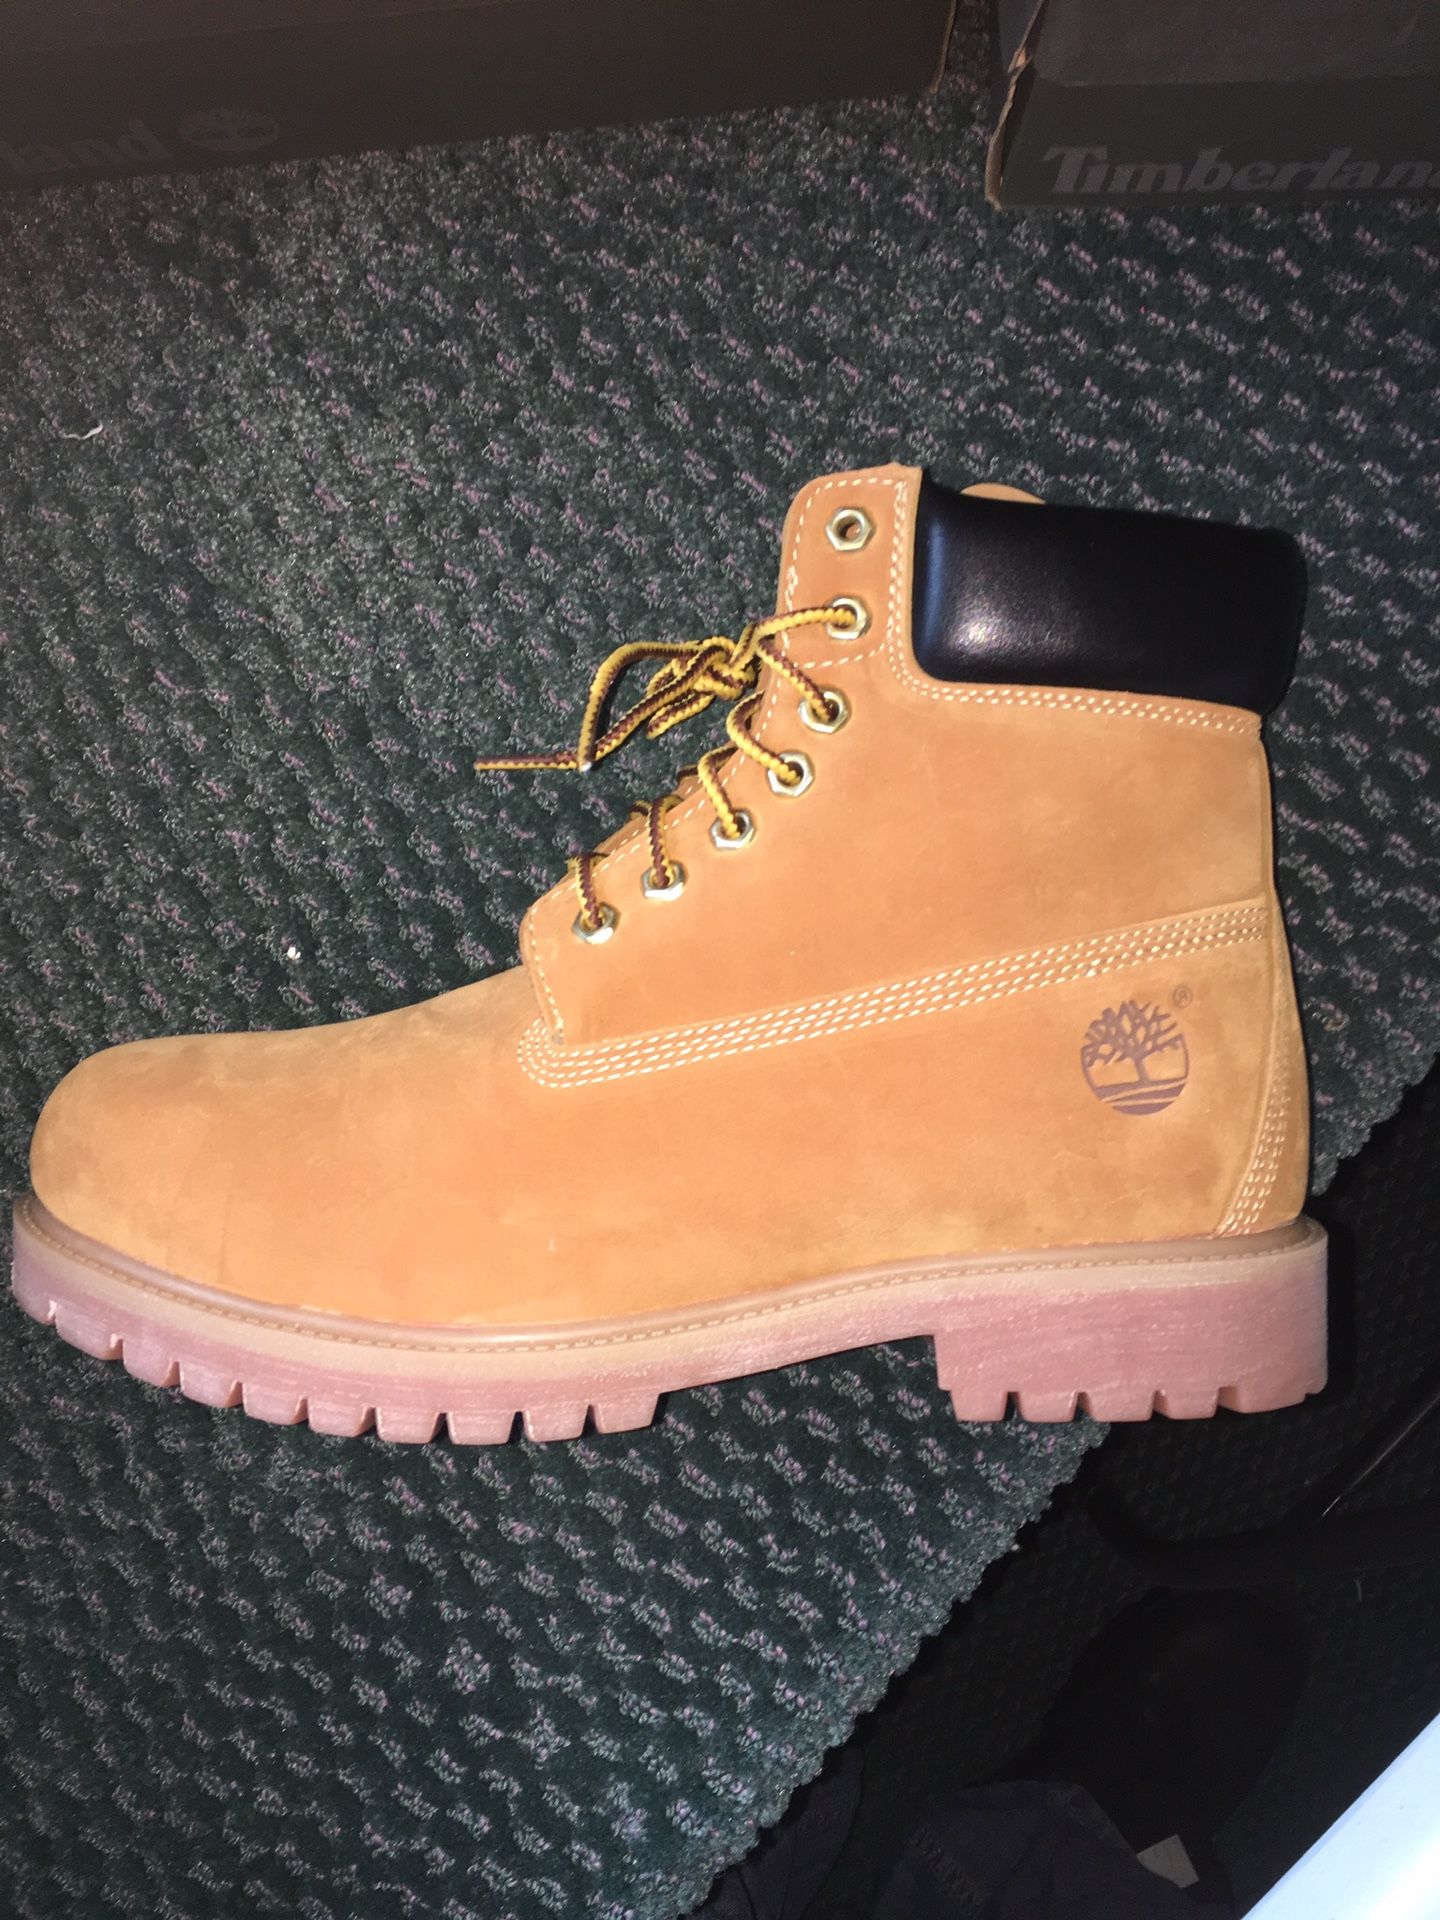 Timberland boots PLEASE READ !!!!